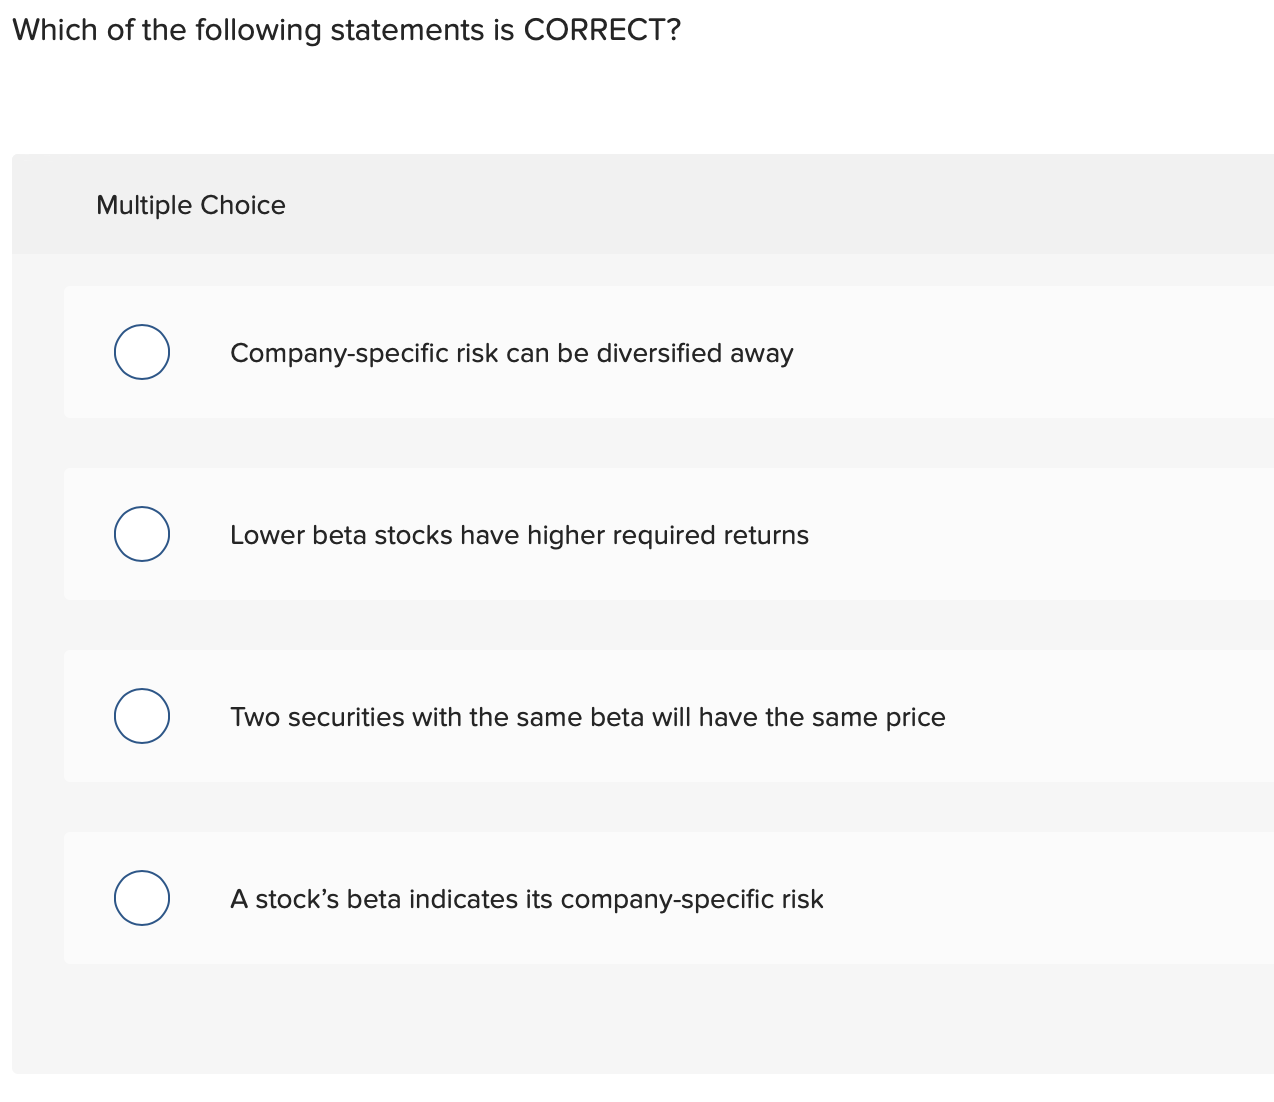 Which of the following statements is CORRECT?
Multiple Choice
Company-specific risk can be diversified away
Lower beta stocks have higher required returns
Two securities with the same beta will have the same price
A stock's beta indicates its company-specific risk
